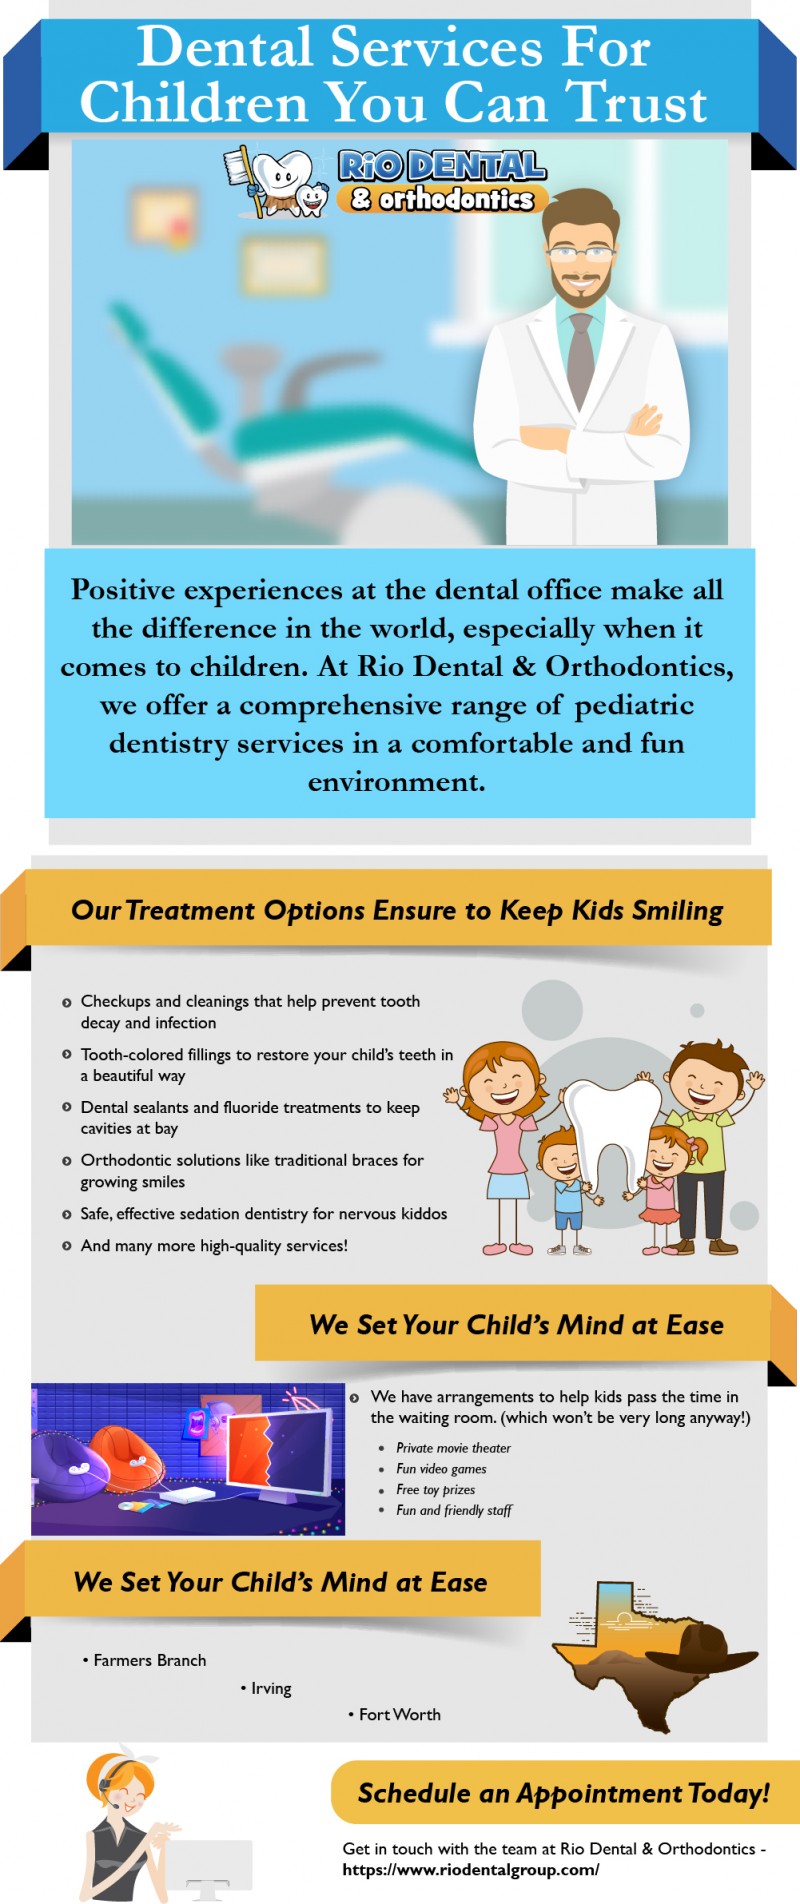 Get Dental Services for Your Childern At Rio Dental & Orthodontics